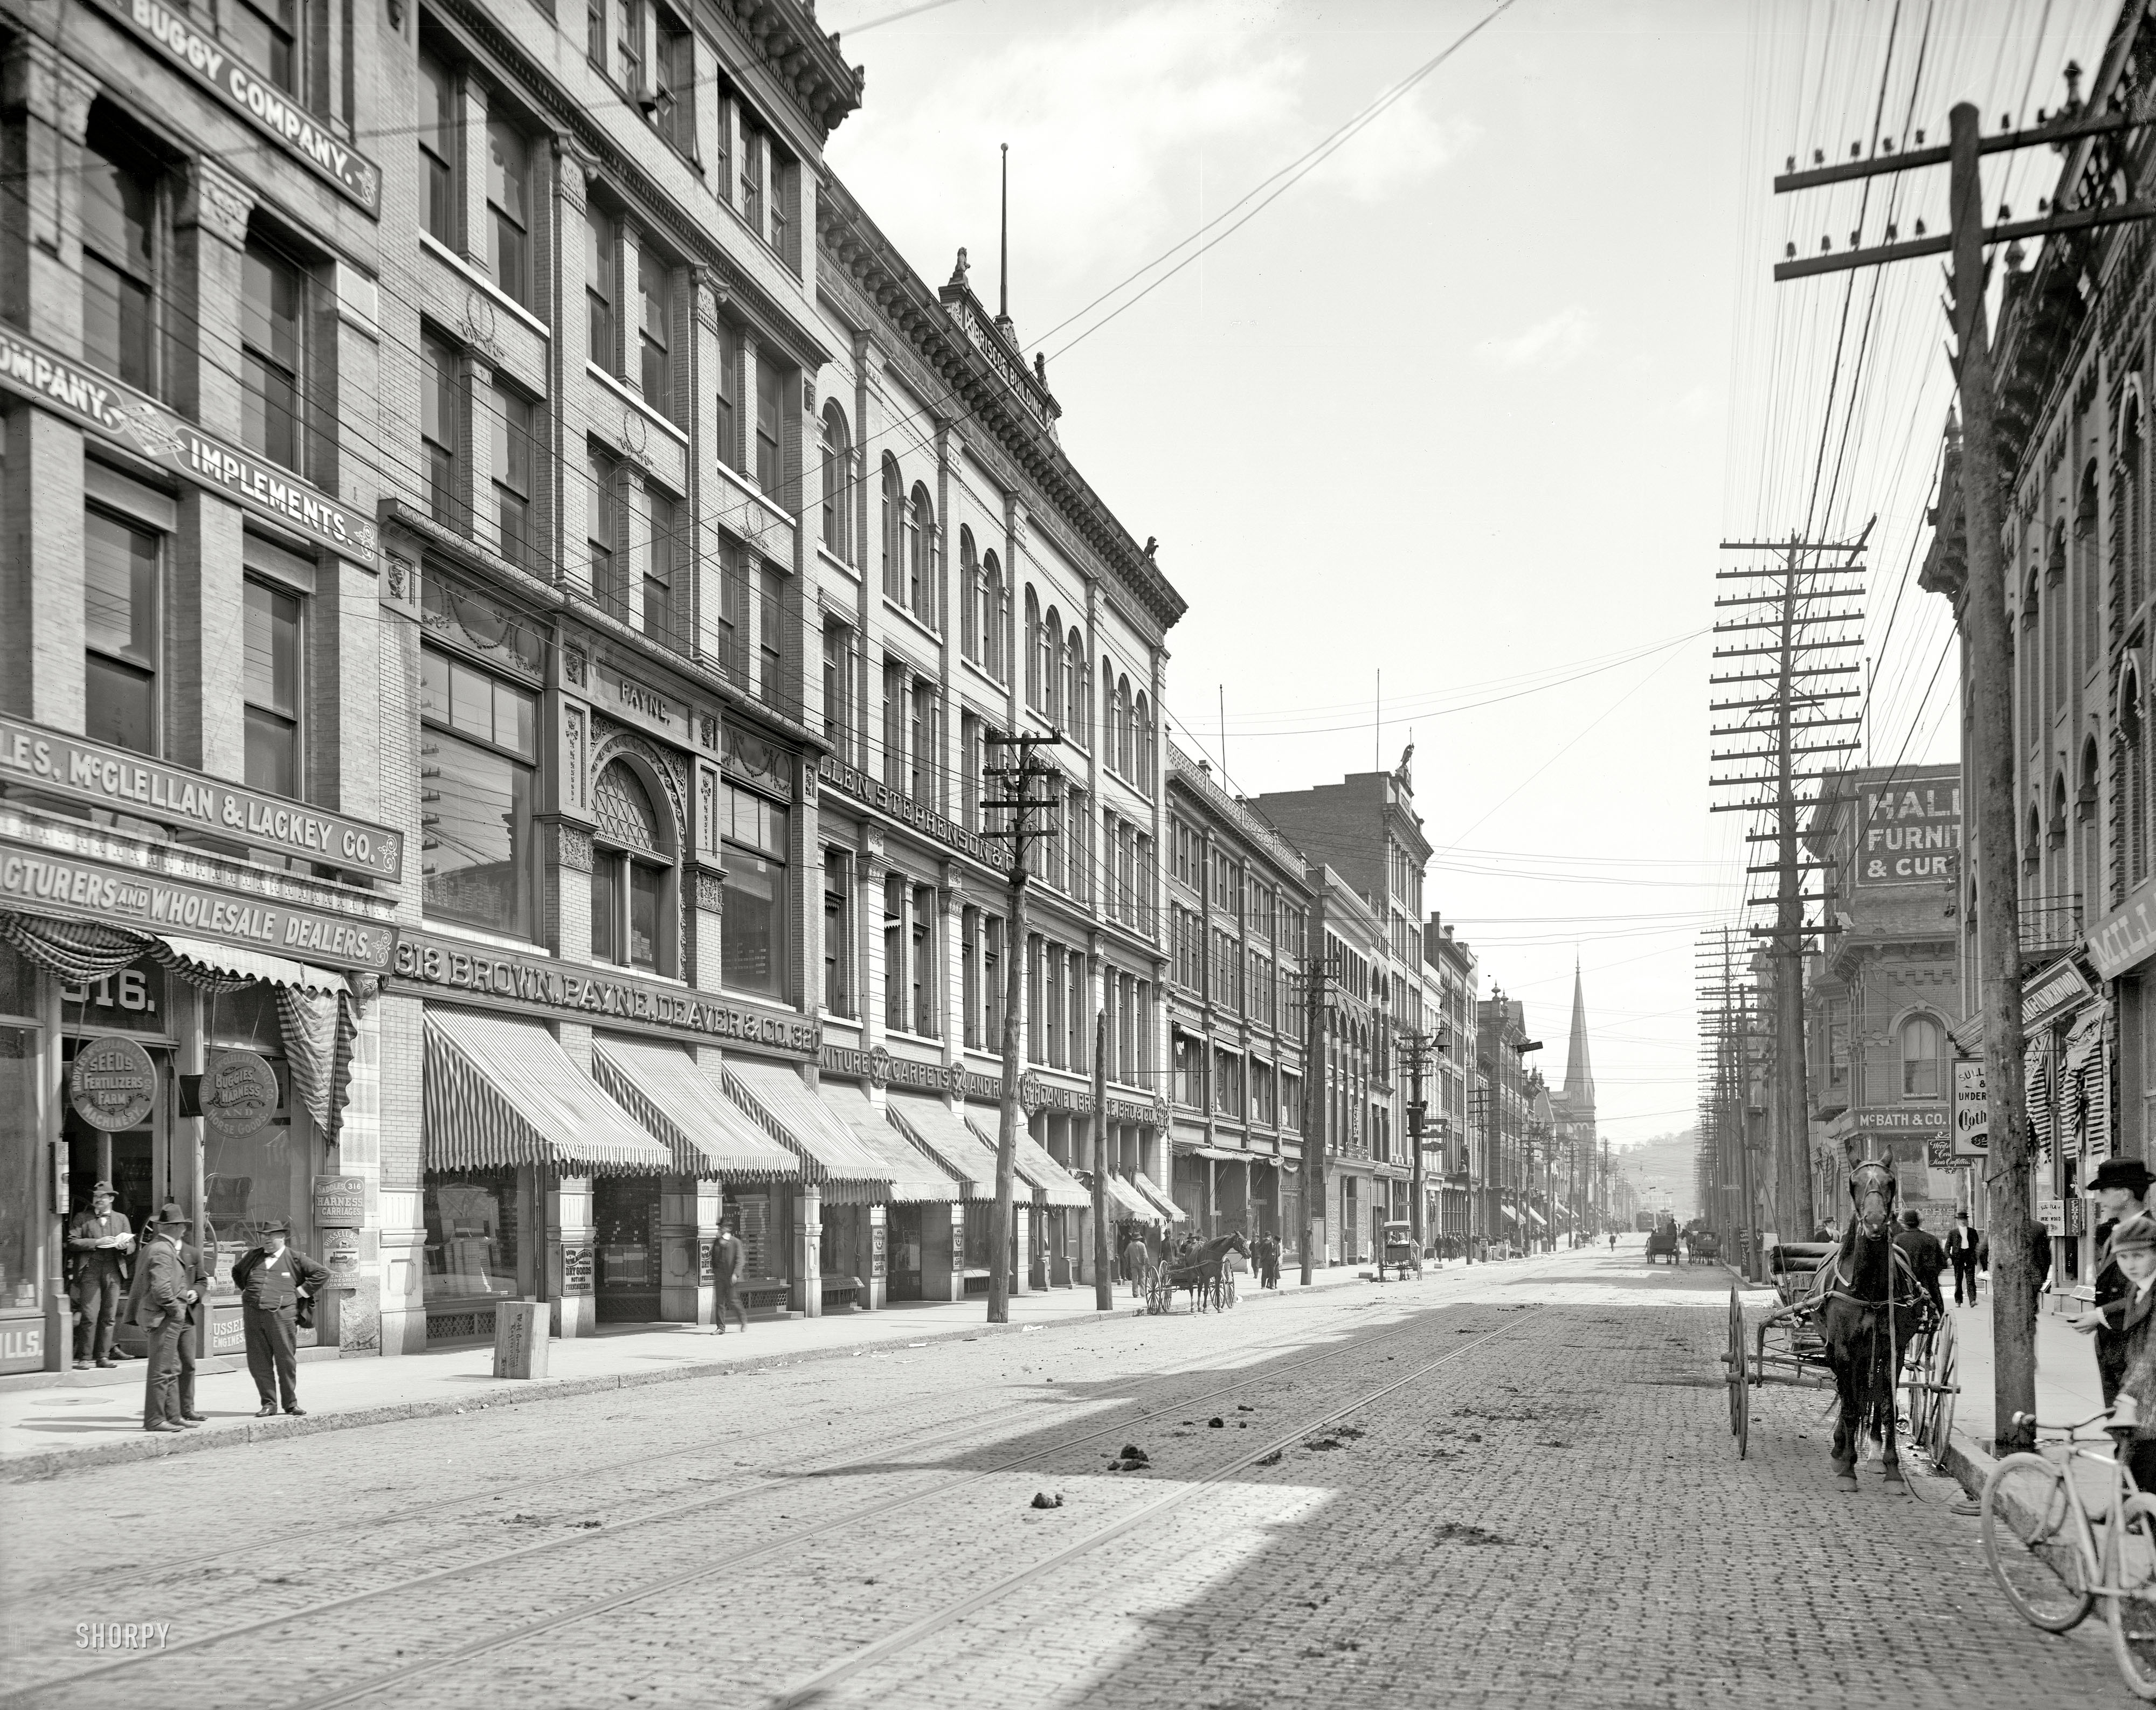 Knoxville, Tennessee, circa 1903. Yet another view of that bustling commercial artery known as Gay Street, home to Broyles, McClellan & Lackey, dealers in Seeds, Fertilizers, Farm Machinery and Buggies, Harness and Horse Goods. 8x10 inch dry plate glass negative, Detroit Publishing Company. View full size.